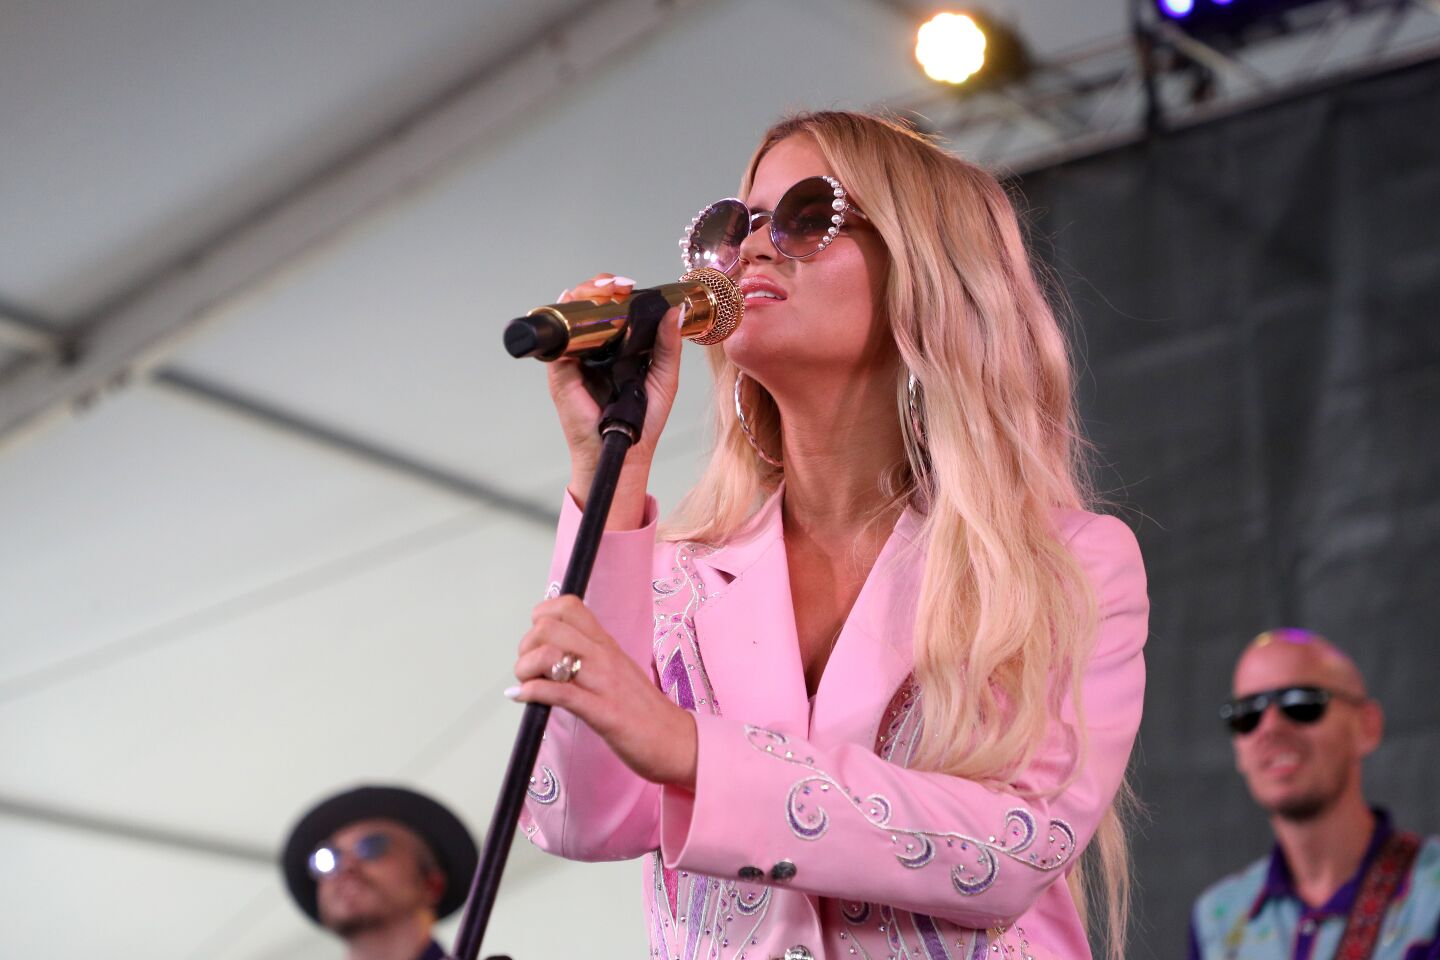 Maren Morris of the Highwomen performs during day one of the 2019 Newport Folk Festival at Fort Adams State Park on July 26, 2019 in Newport, Rhode Island. (Photo by Mike Lawrie/Getty Images)